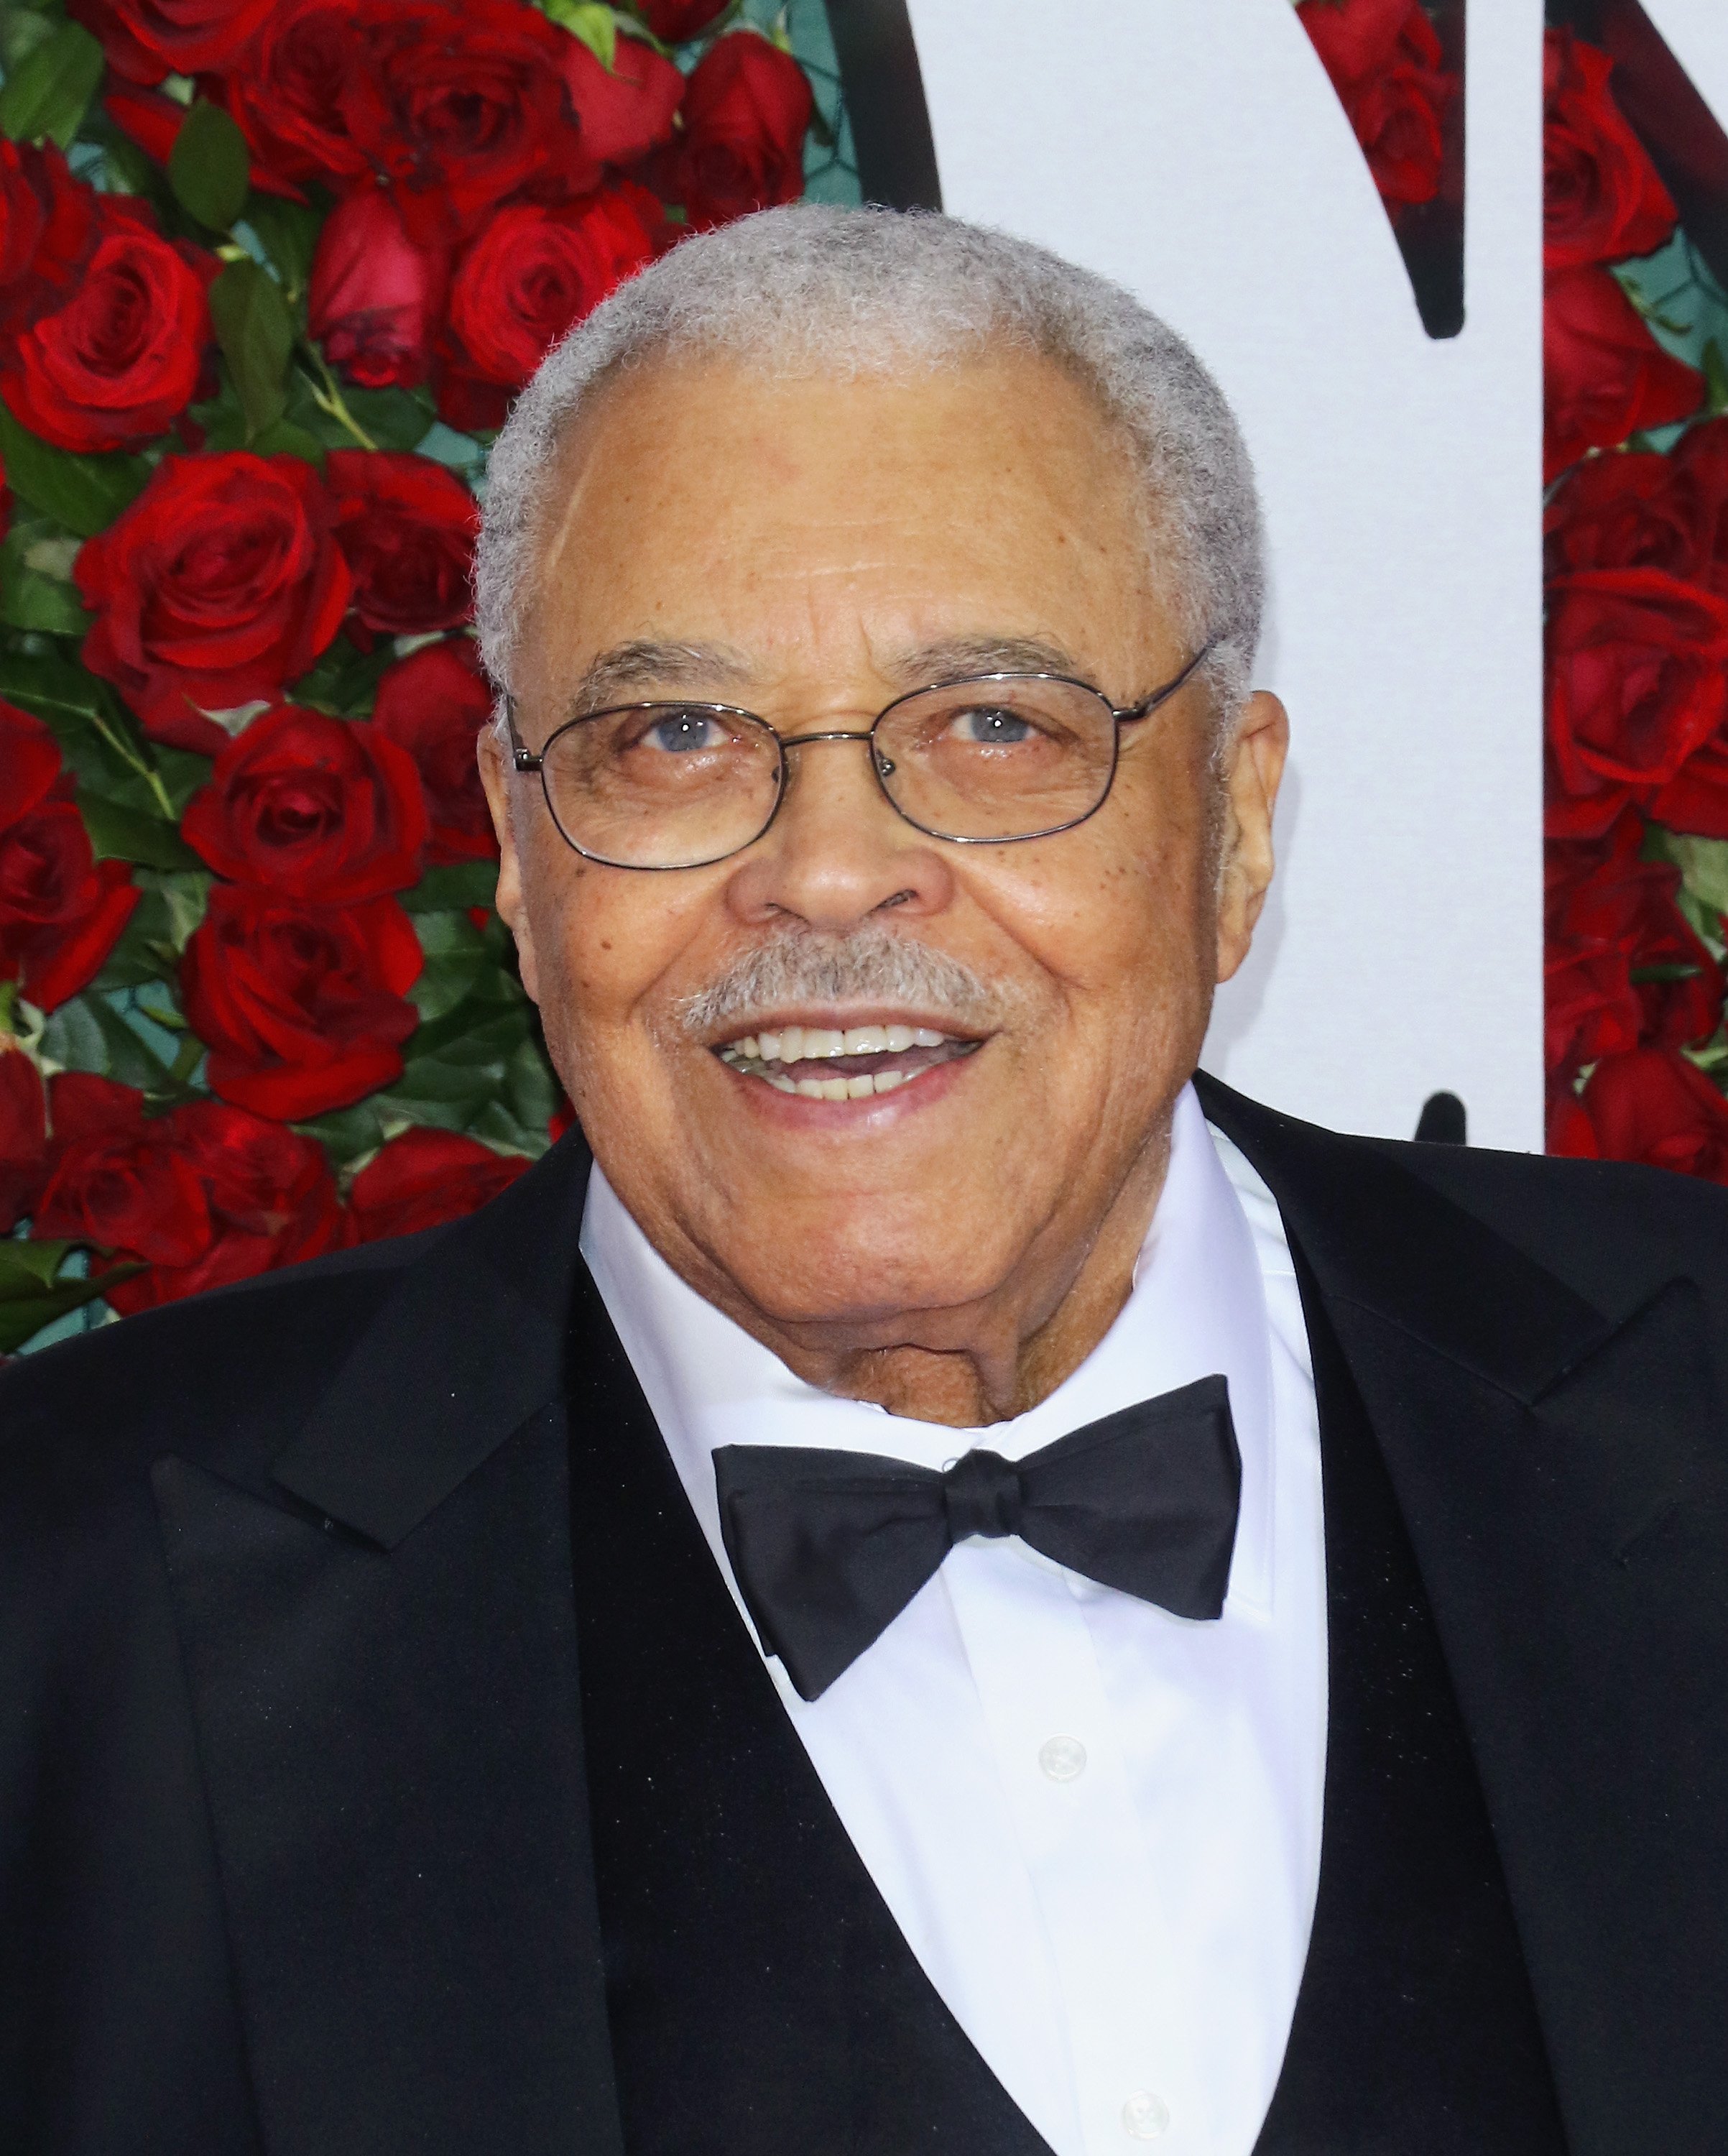 James Earl Jones attends the 70th Annual Tony Awards at Beacon Theatre on June 12, 2016 in New York City | Source: Getty Images 